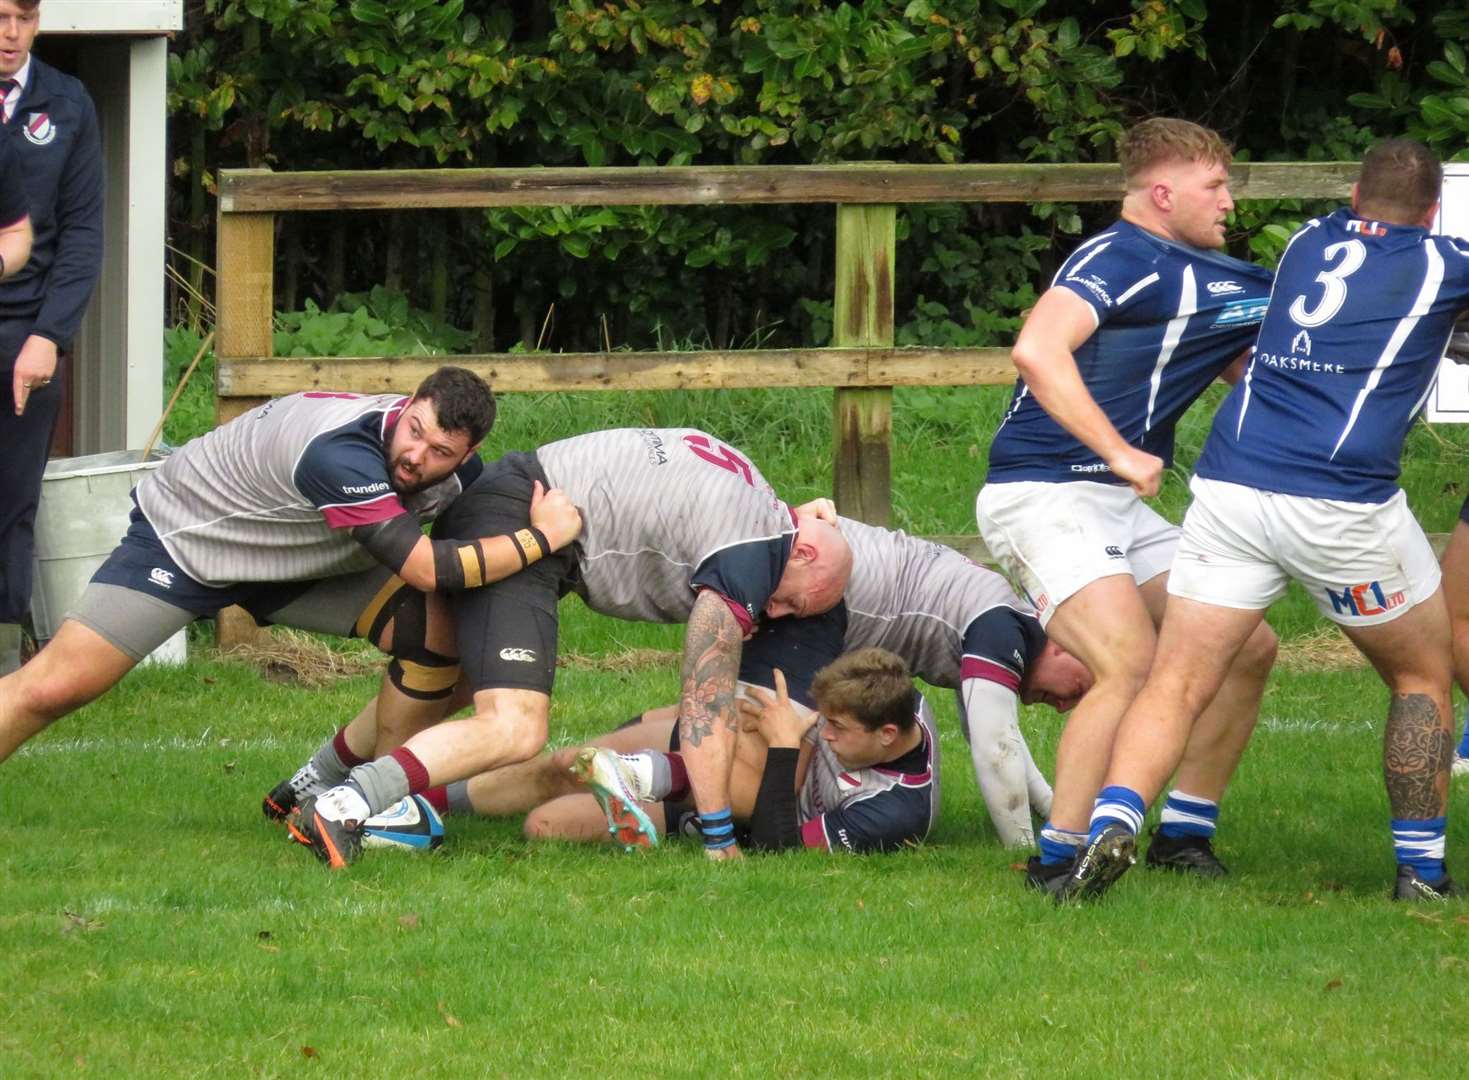 Ruck action from West Norfolk's game at Diss